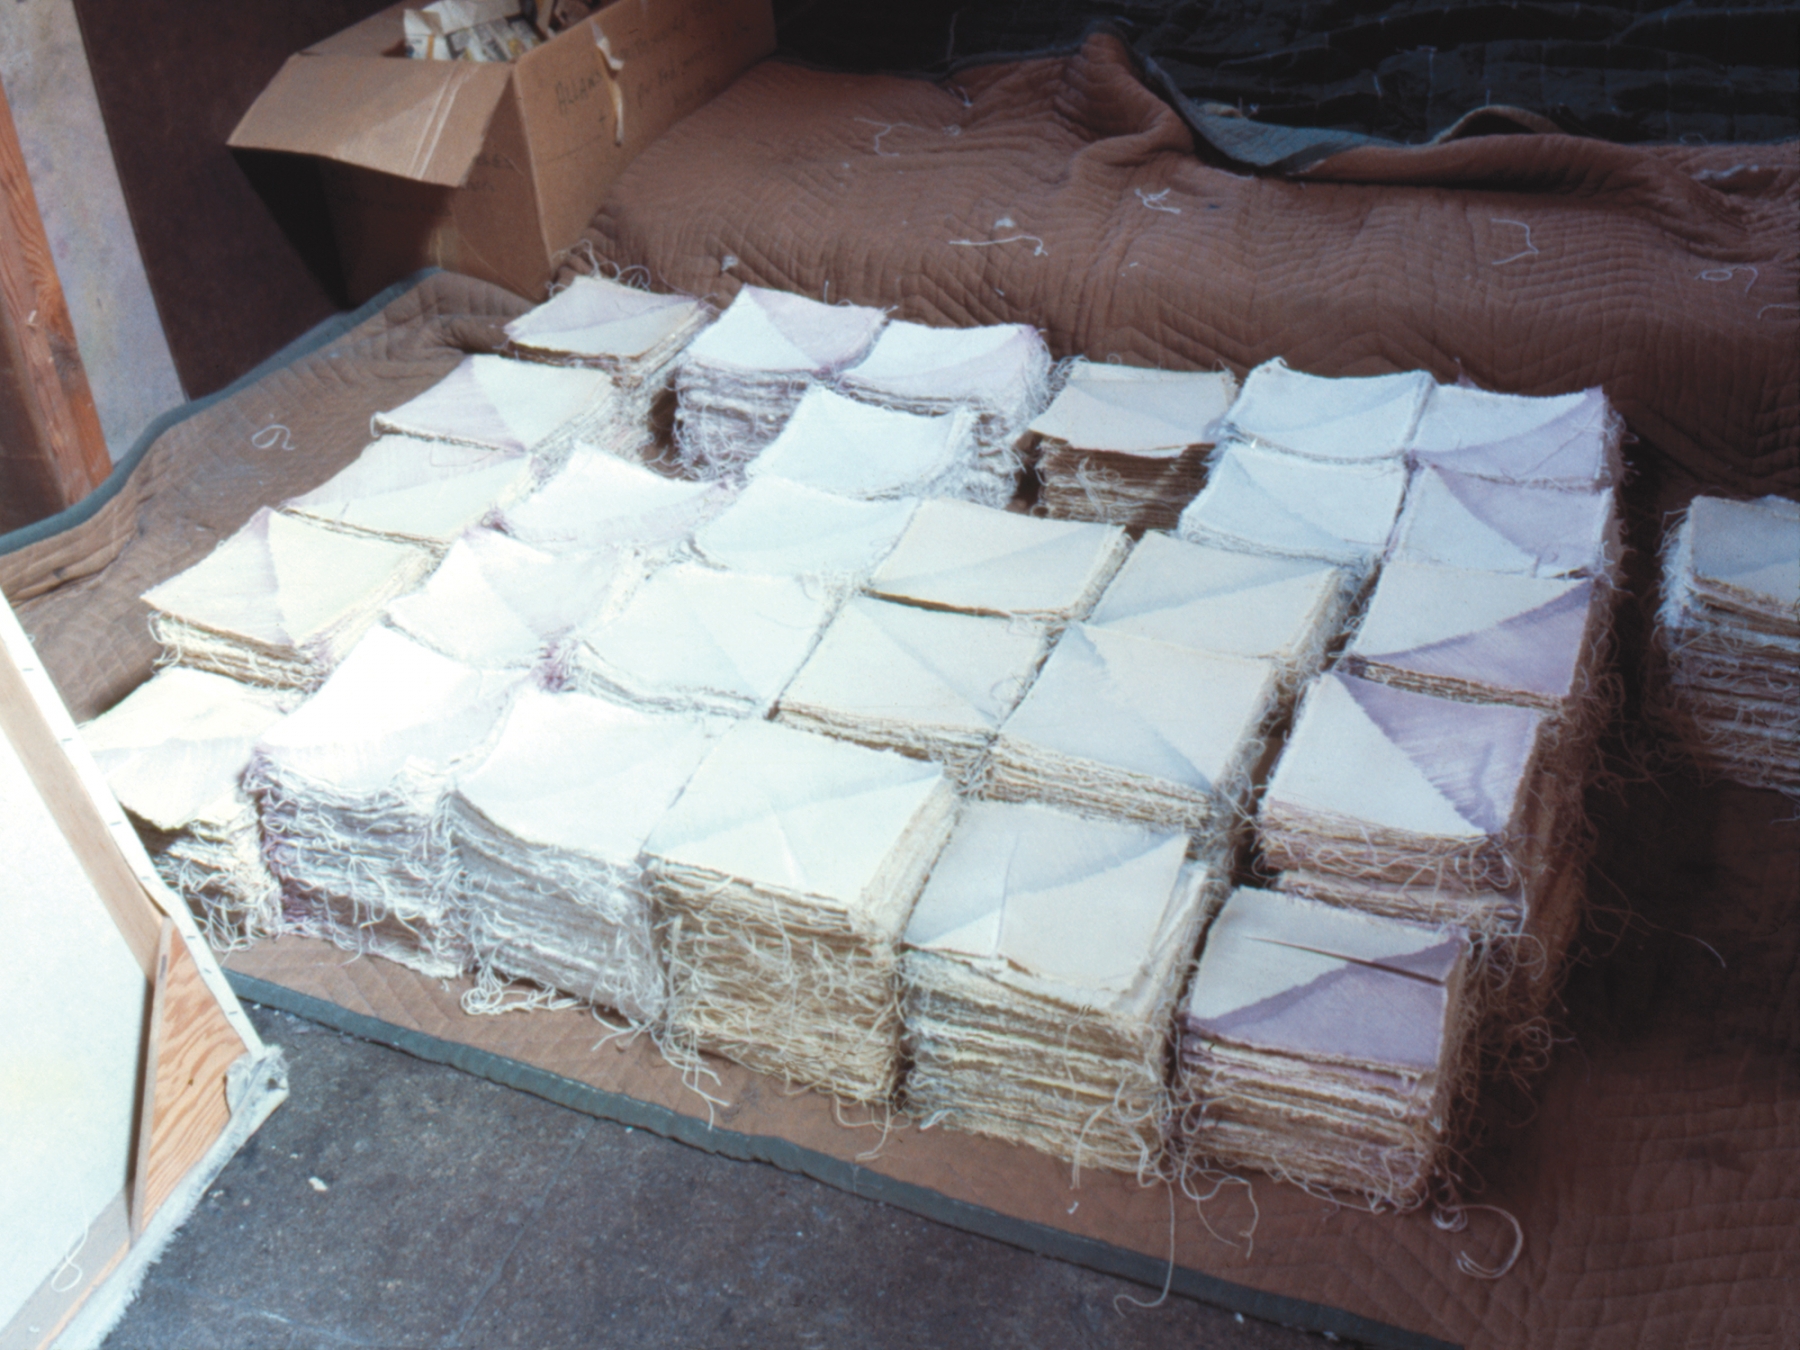 Constructed Paintings in process, Venice, California, 1972